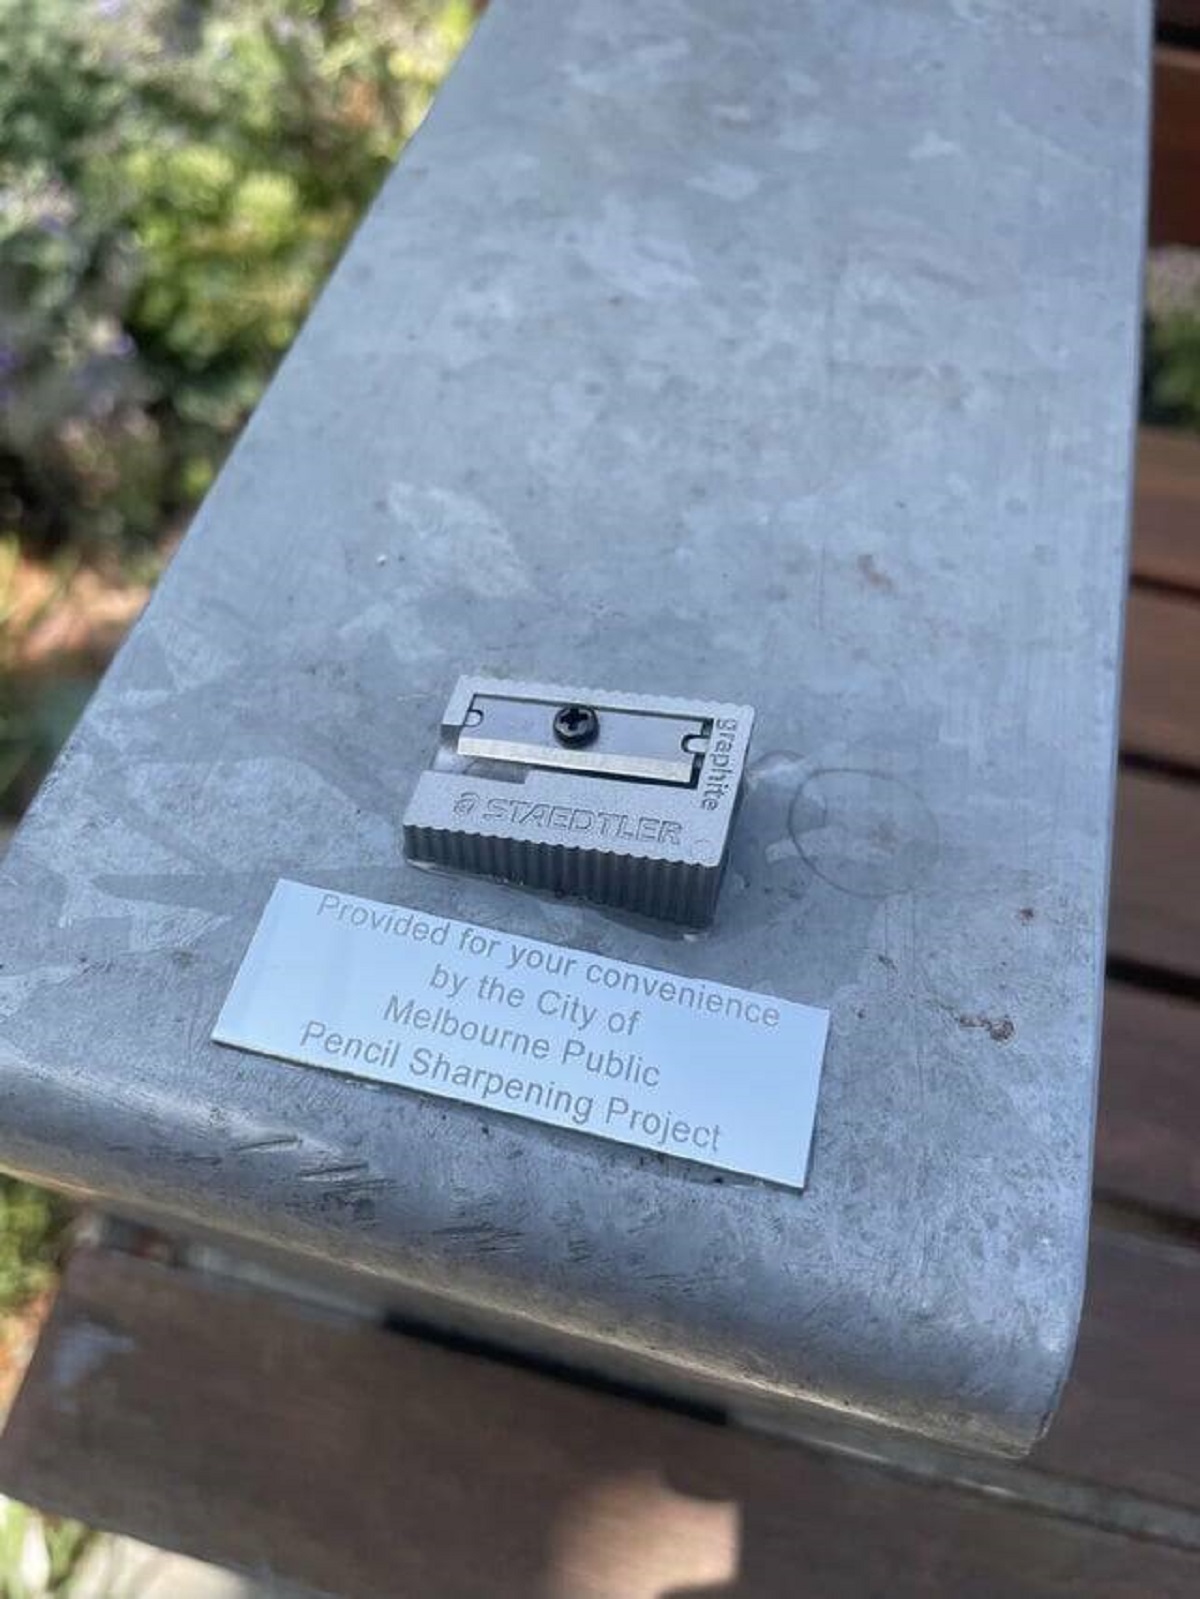 "A pencil sharpener on a bench handle in a public park in Melbourne, Australia"